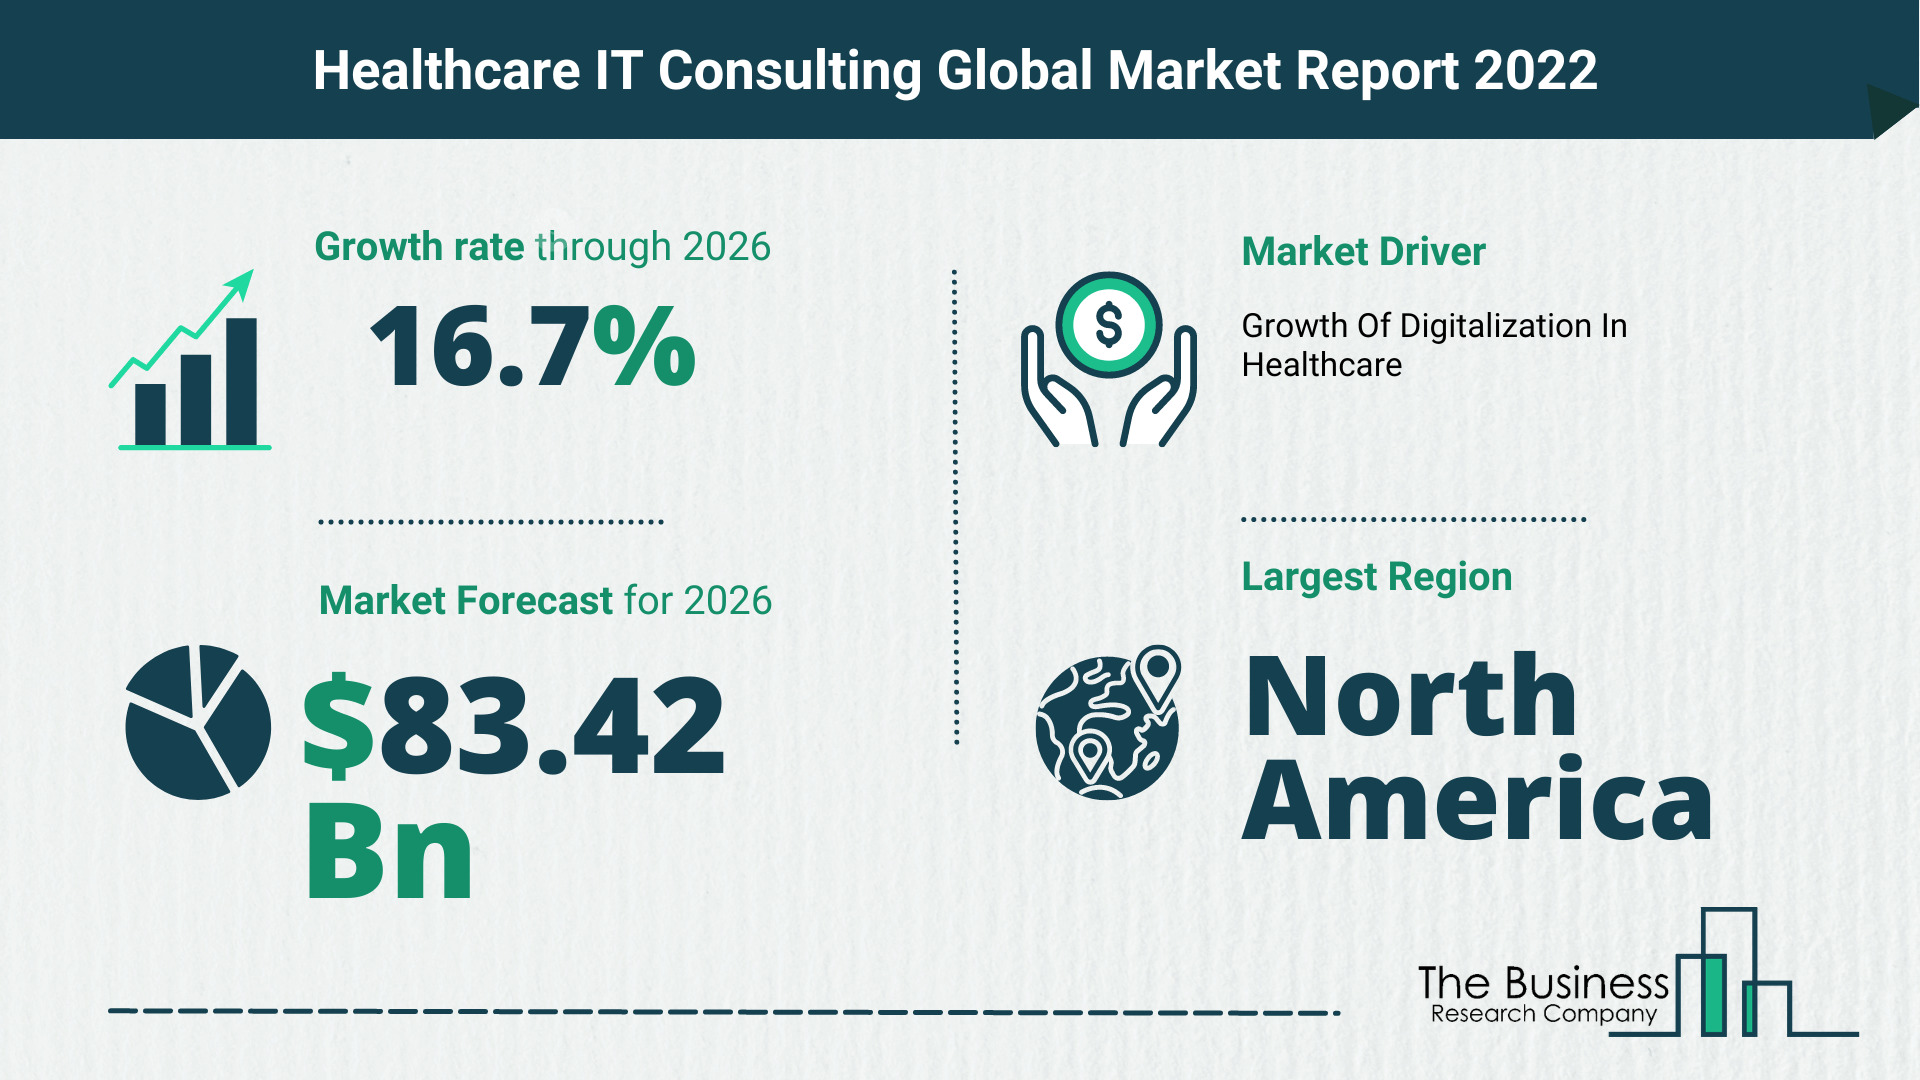 Global Healthcare IT Consulting Market